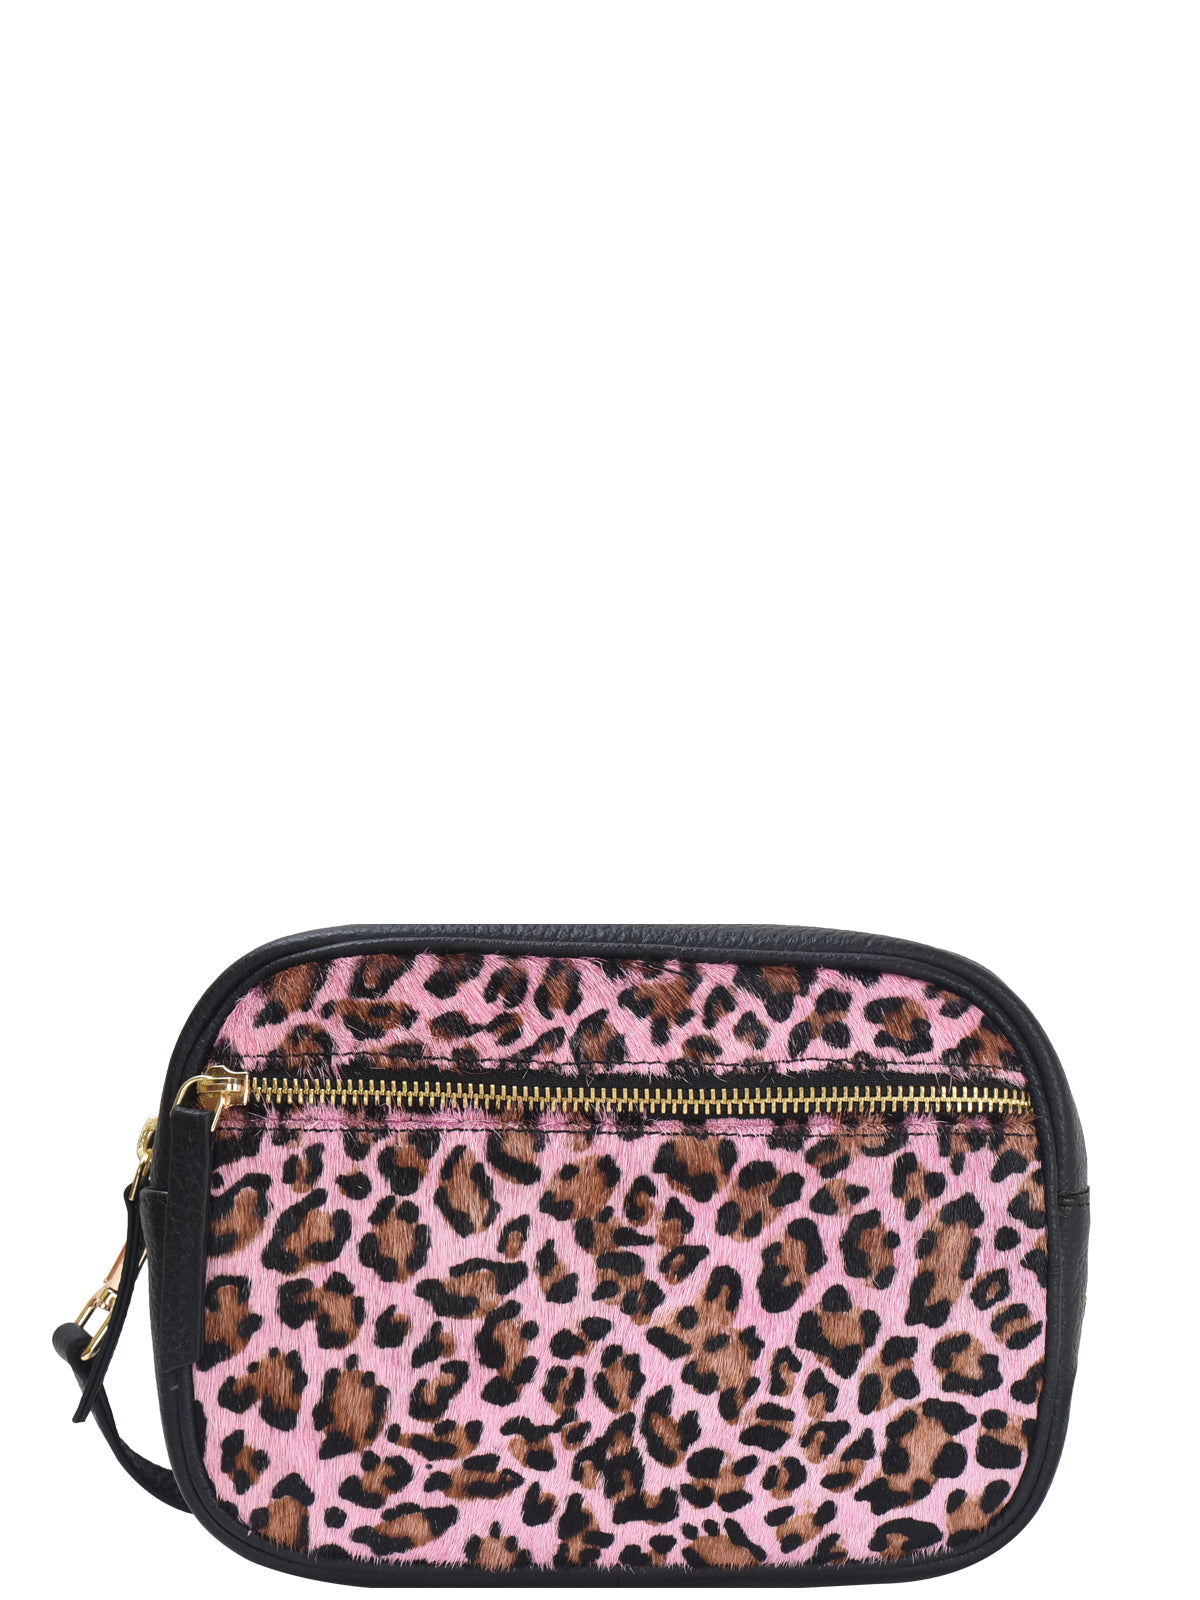 Pink Leopard Print Convertible Leather Cross Body Camera Bag